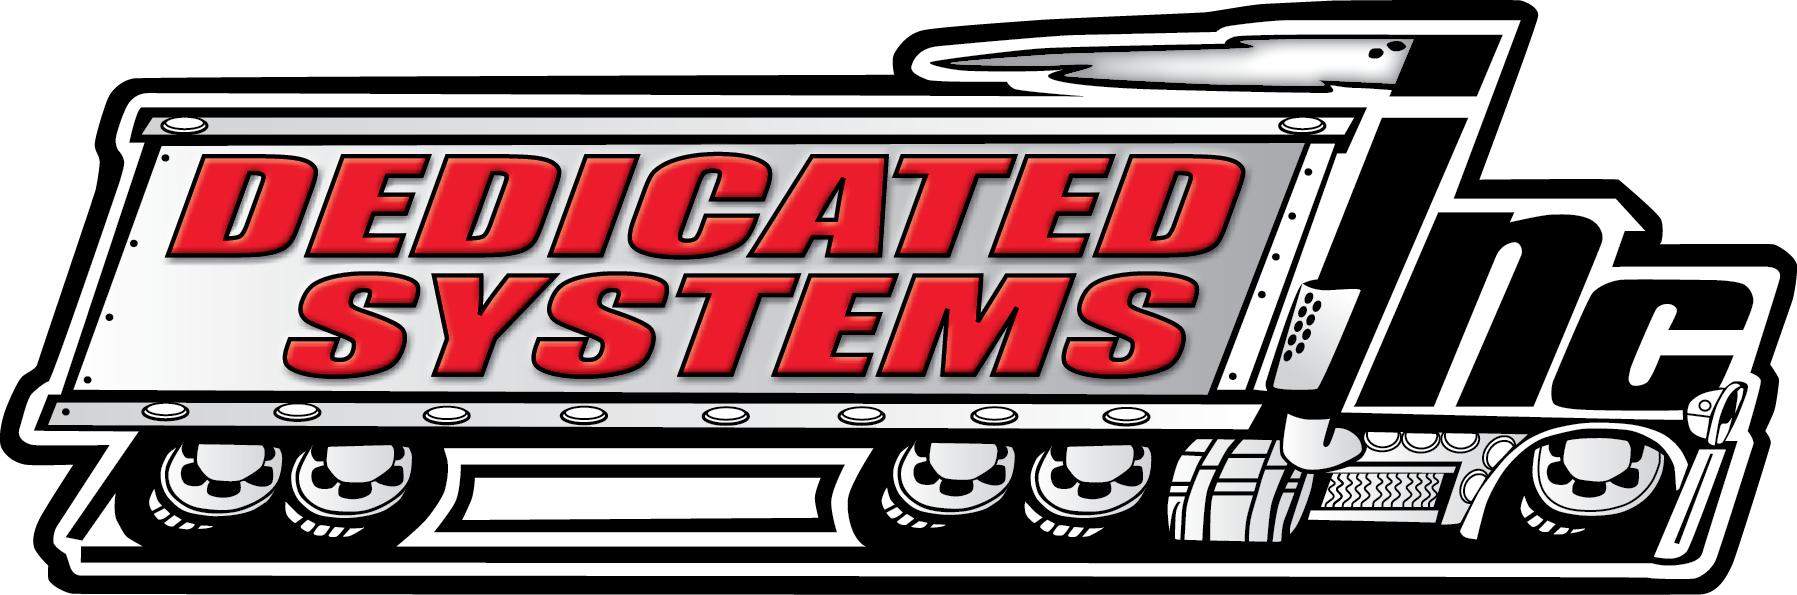 Dedicated Systems